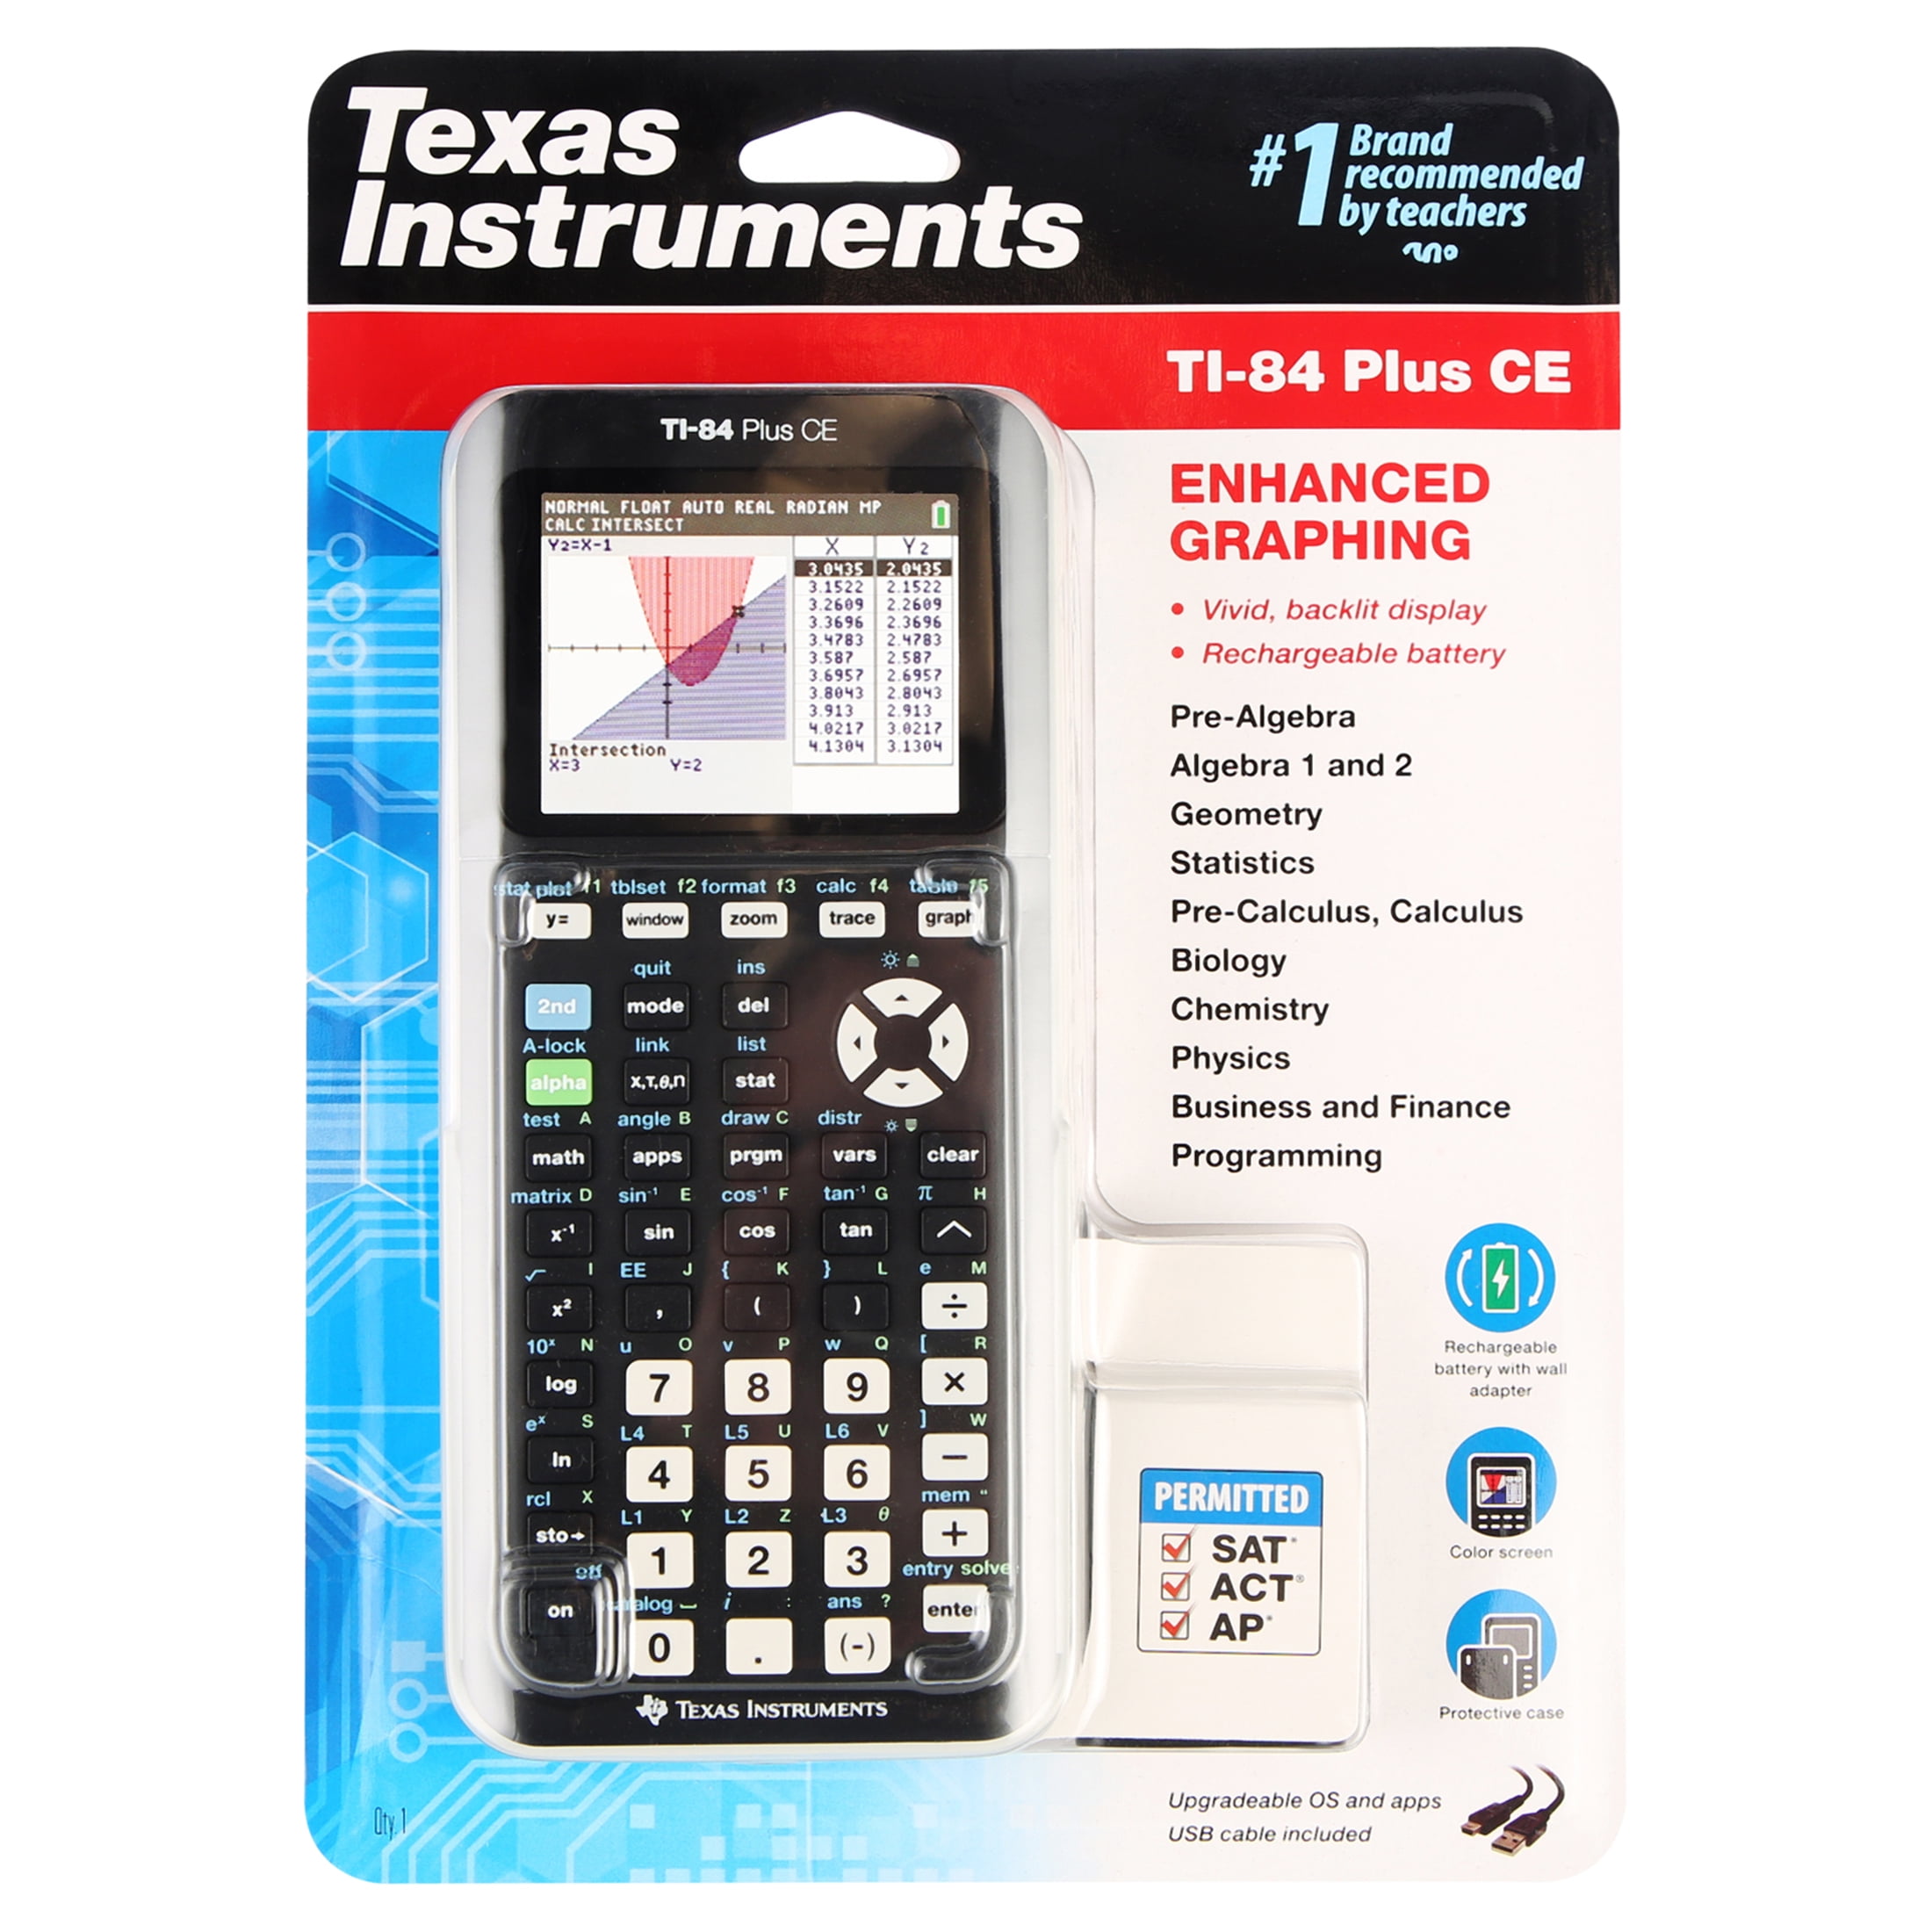 Texas Instruments Ti-84 Plus CE Graphing Calculator, Black, 7.5 inch 